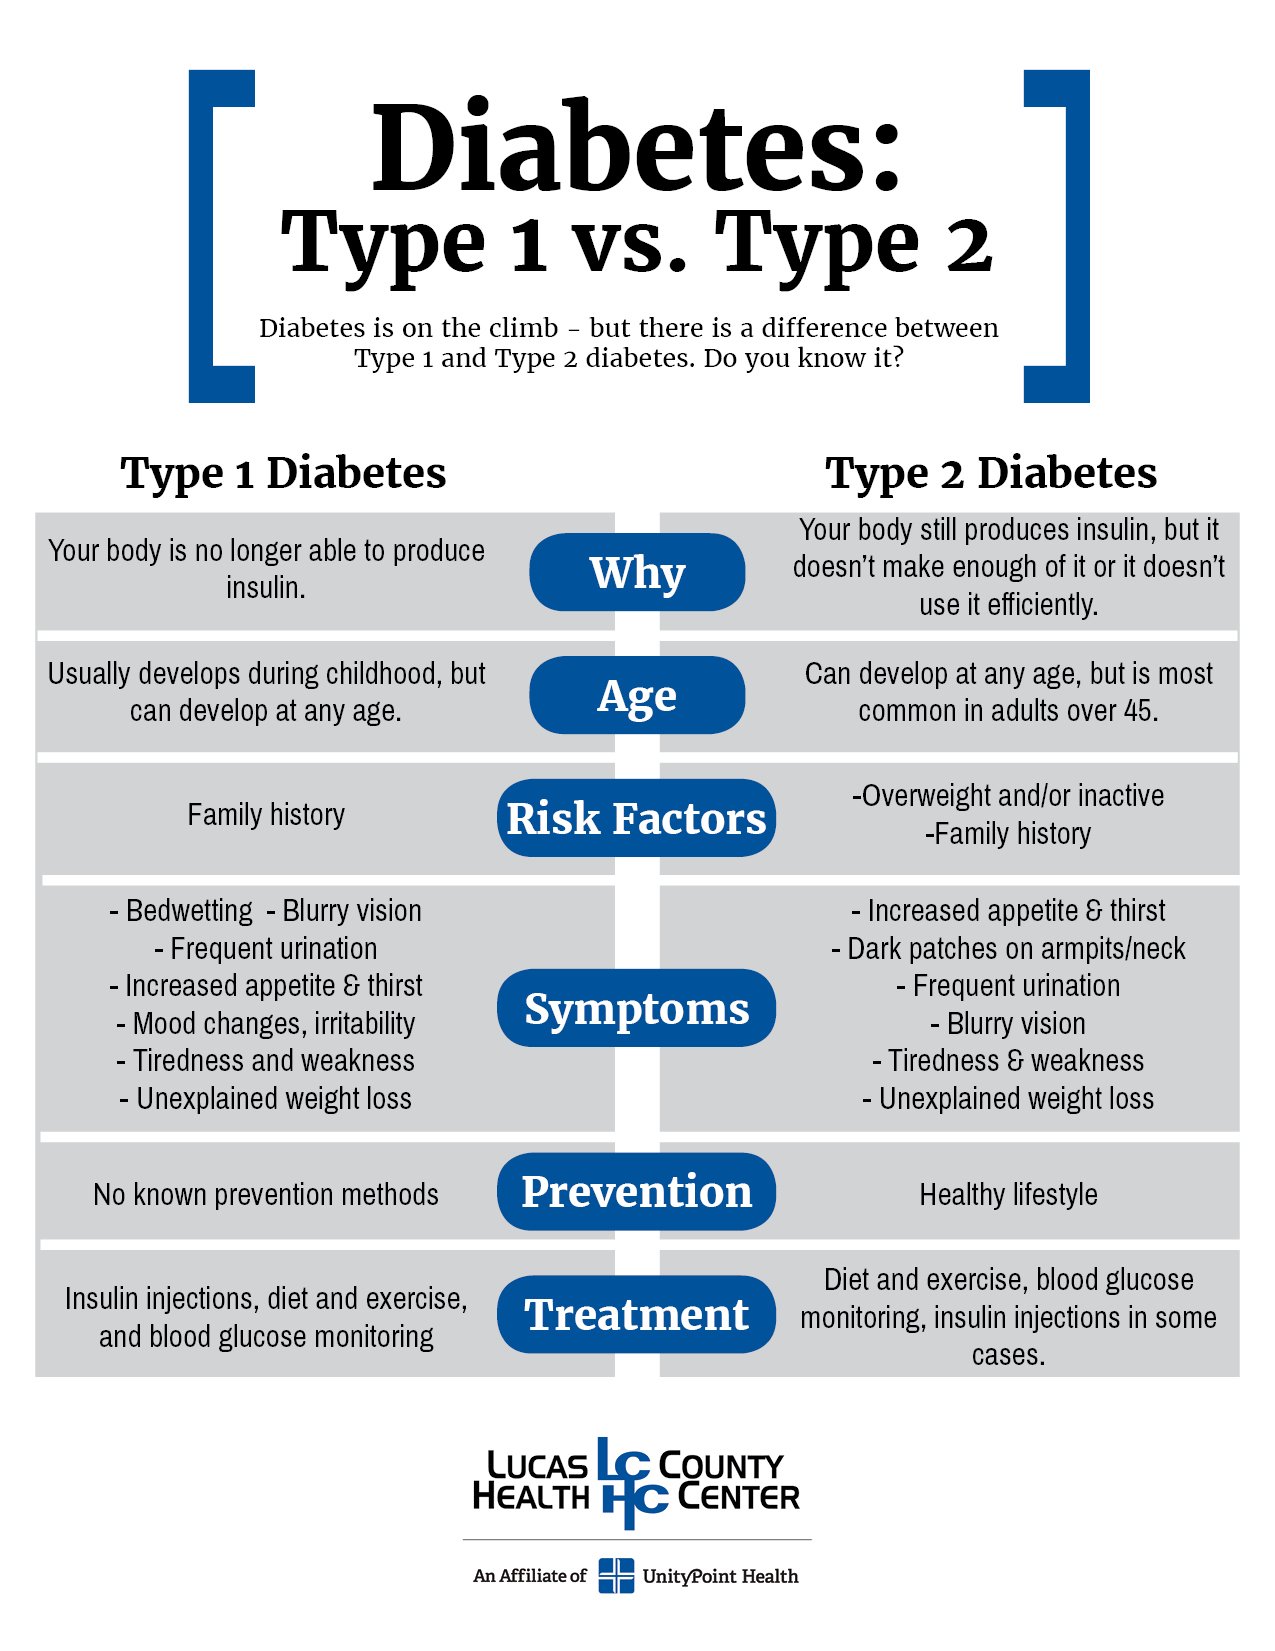 LCHC on Twitter: "Do you know the difference between Type ...